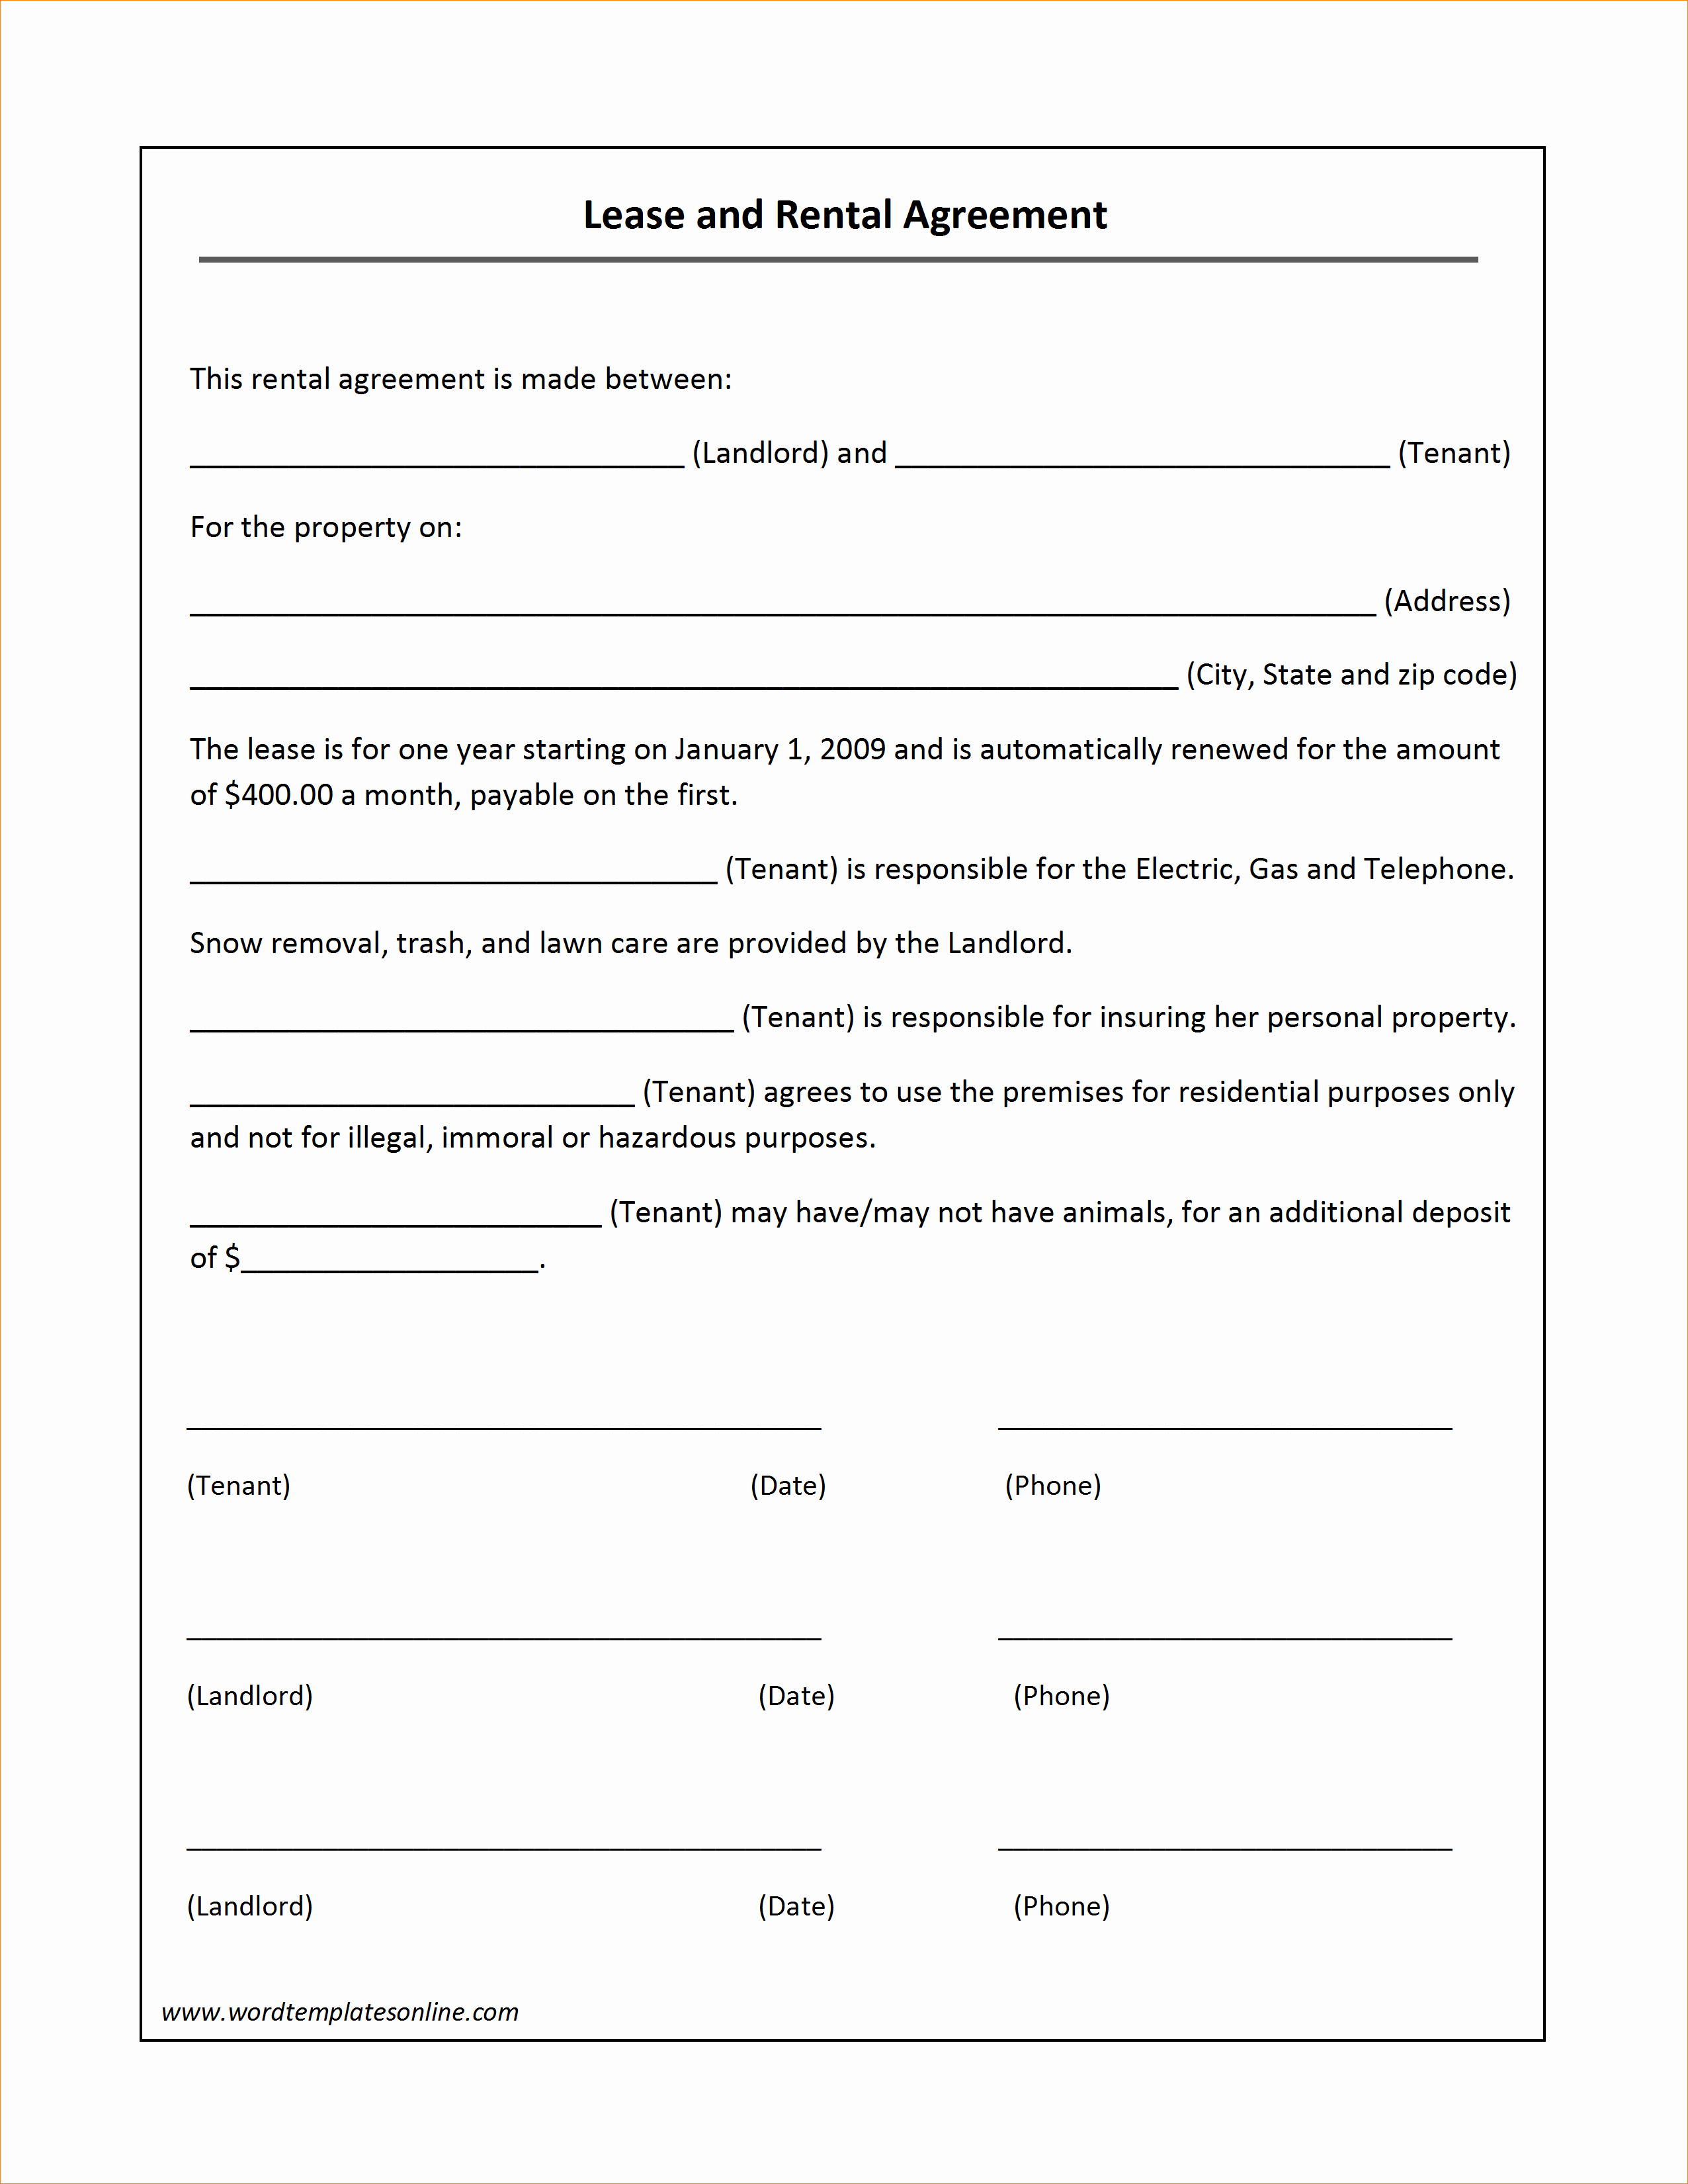 Free Lease Agreements Template Staruptalent